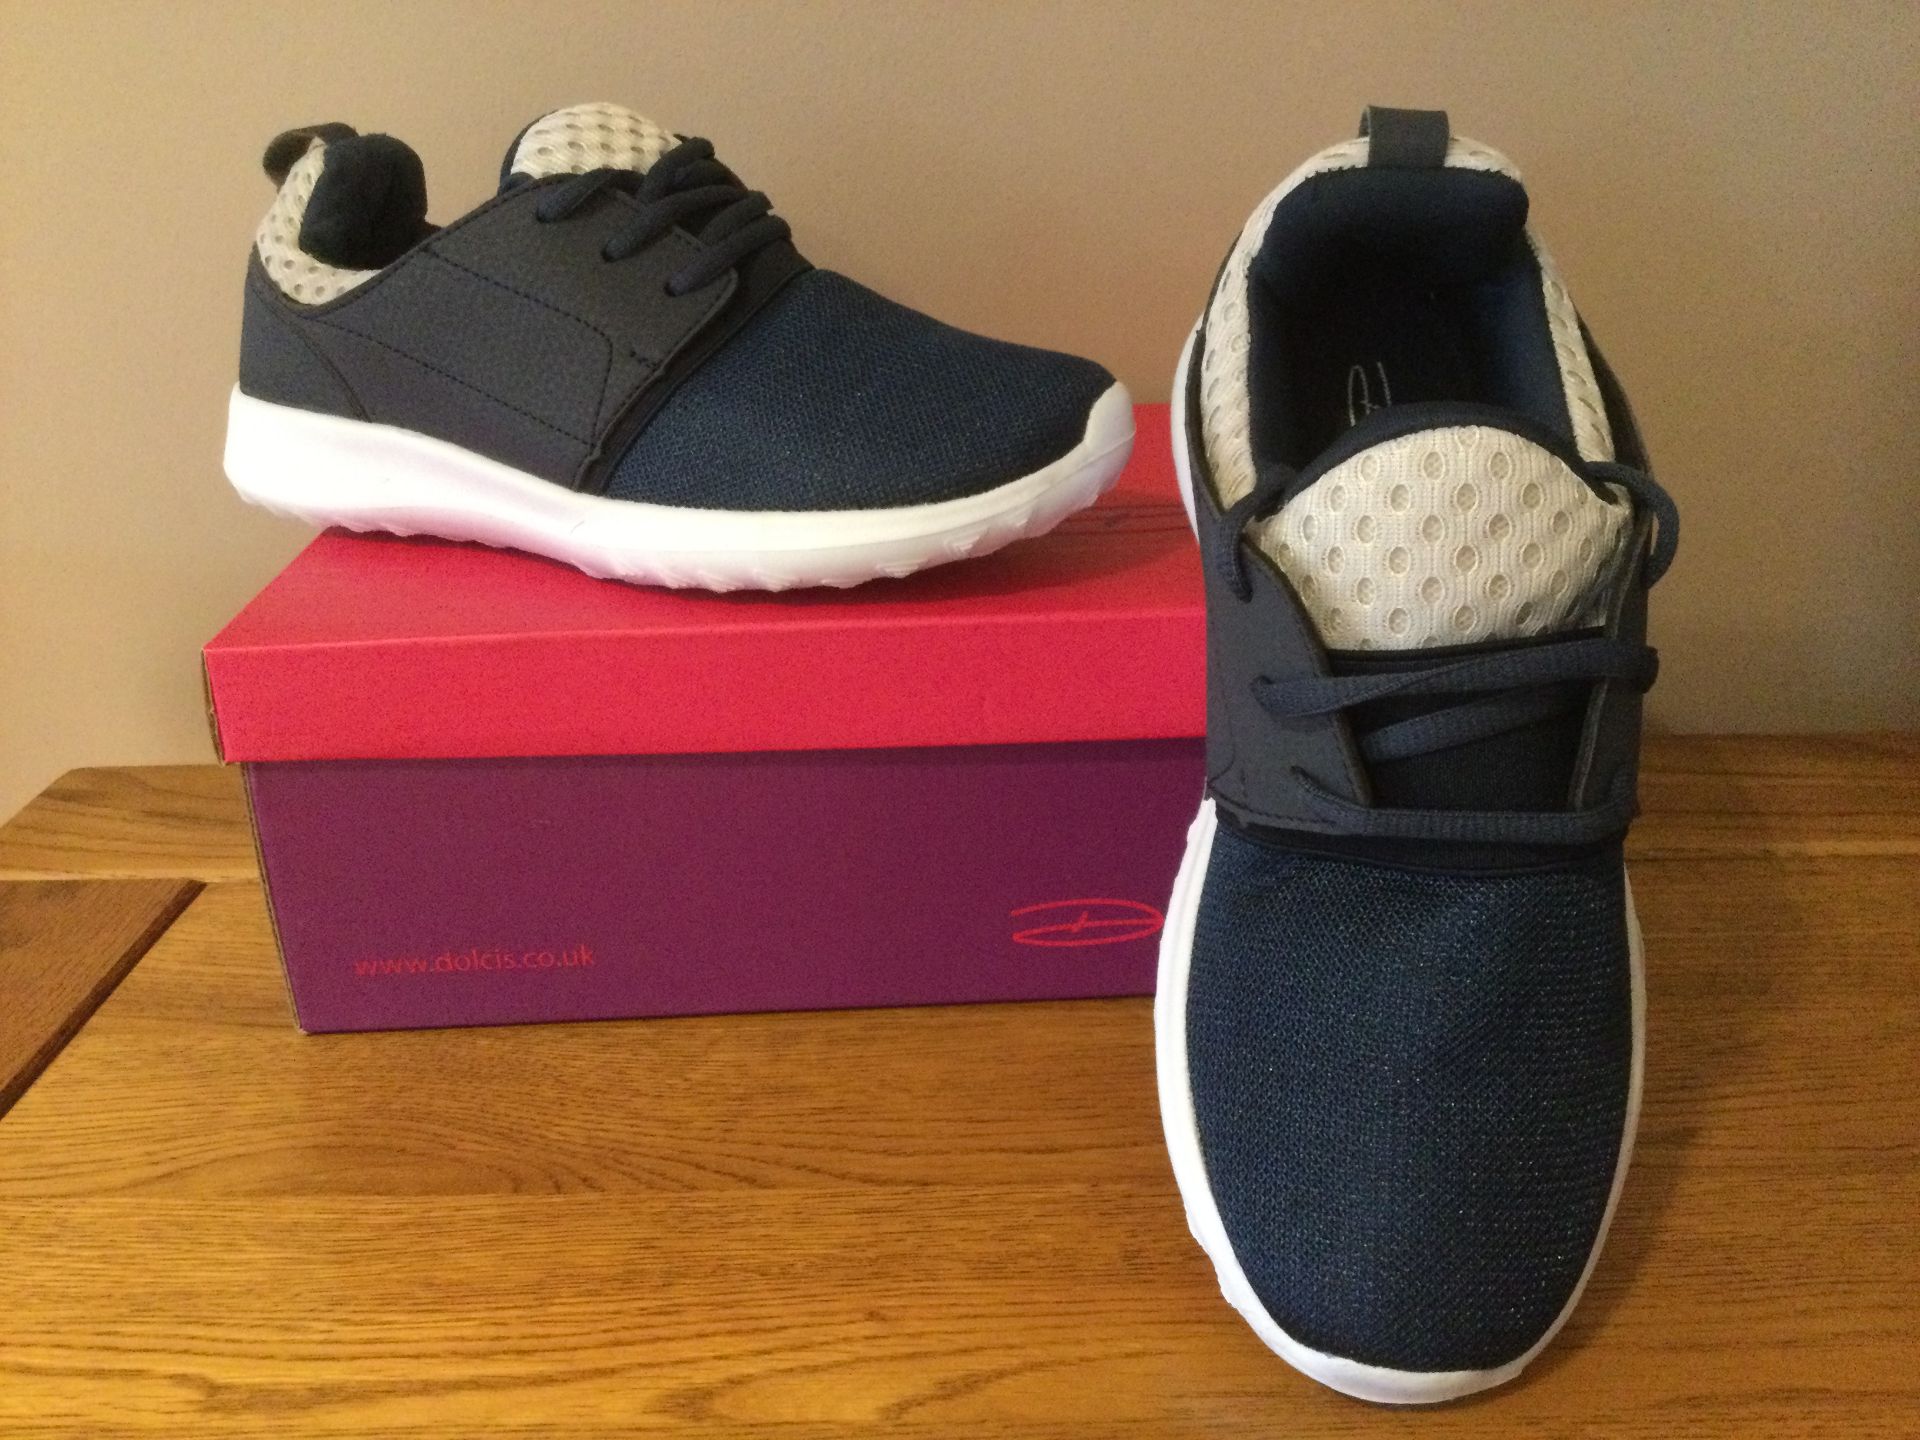 Dolcis “Rene” Women’s Memory Foam Trainers, Size 5, Navy - New RRP £28.99 - Image 3 of 5